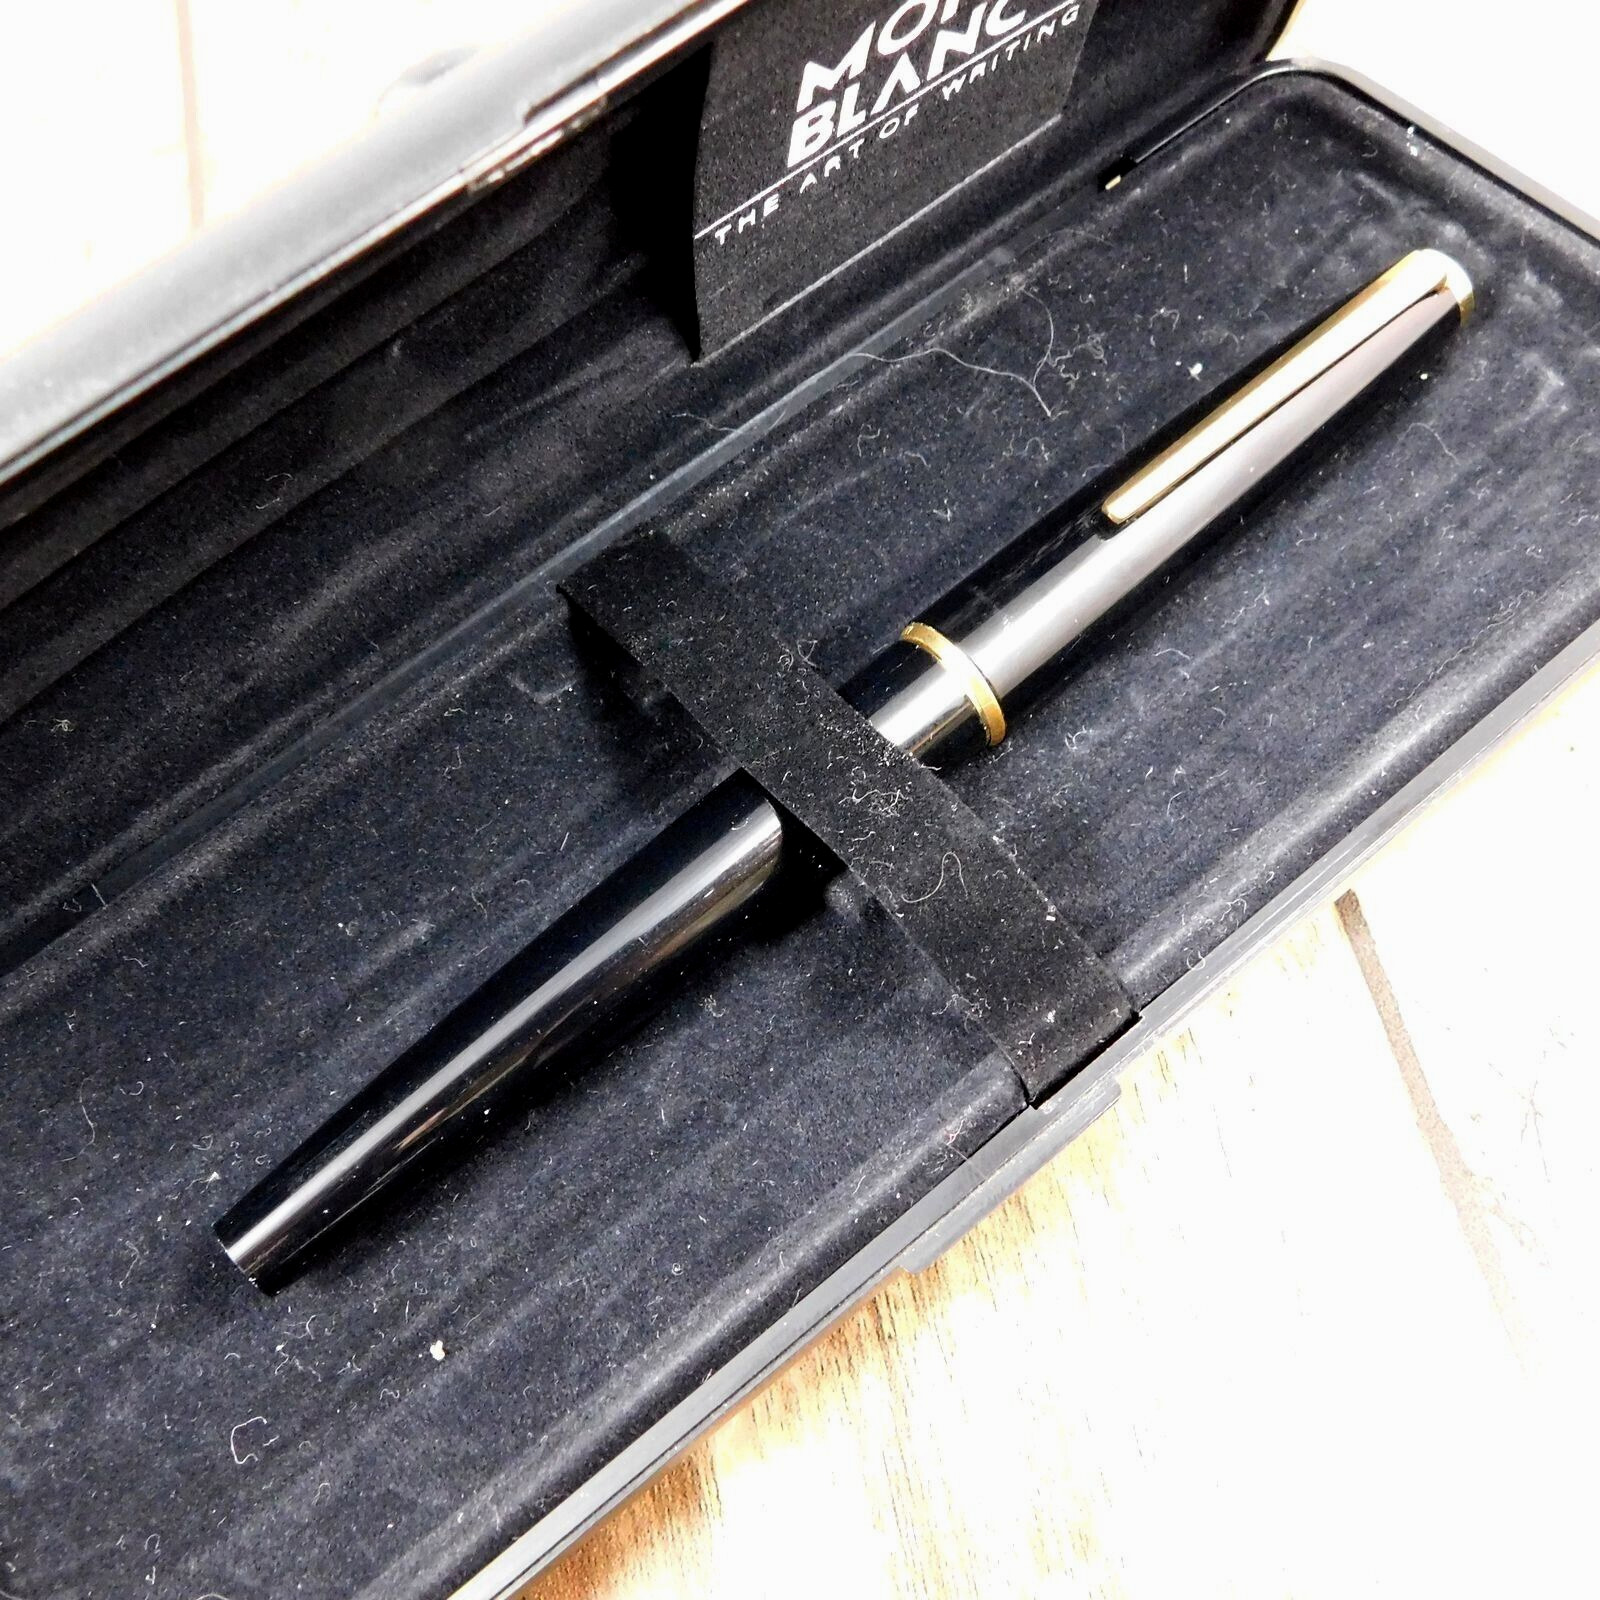 MONTBLANC 14K/ct 585 FOUNTAIN PEN VINTAGE BLACK GOLD GERMANY MADE WITH BOX A215